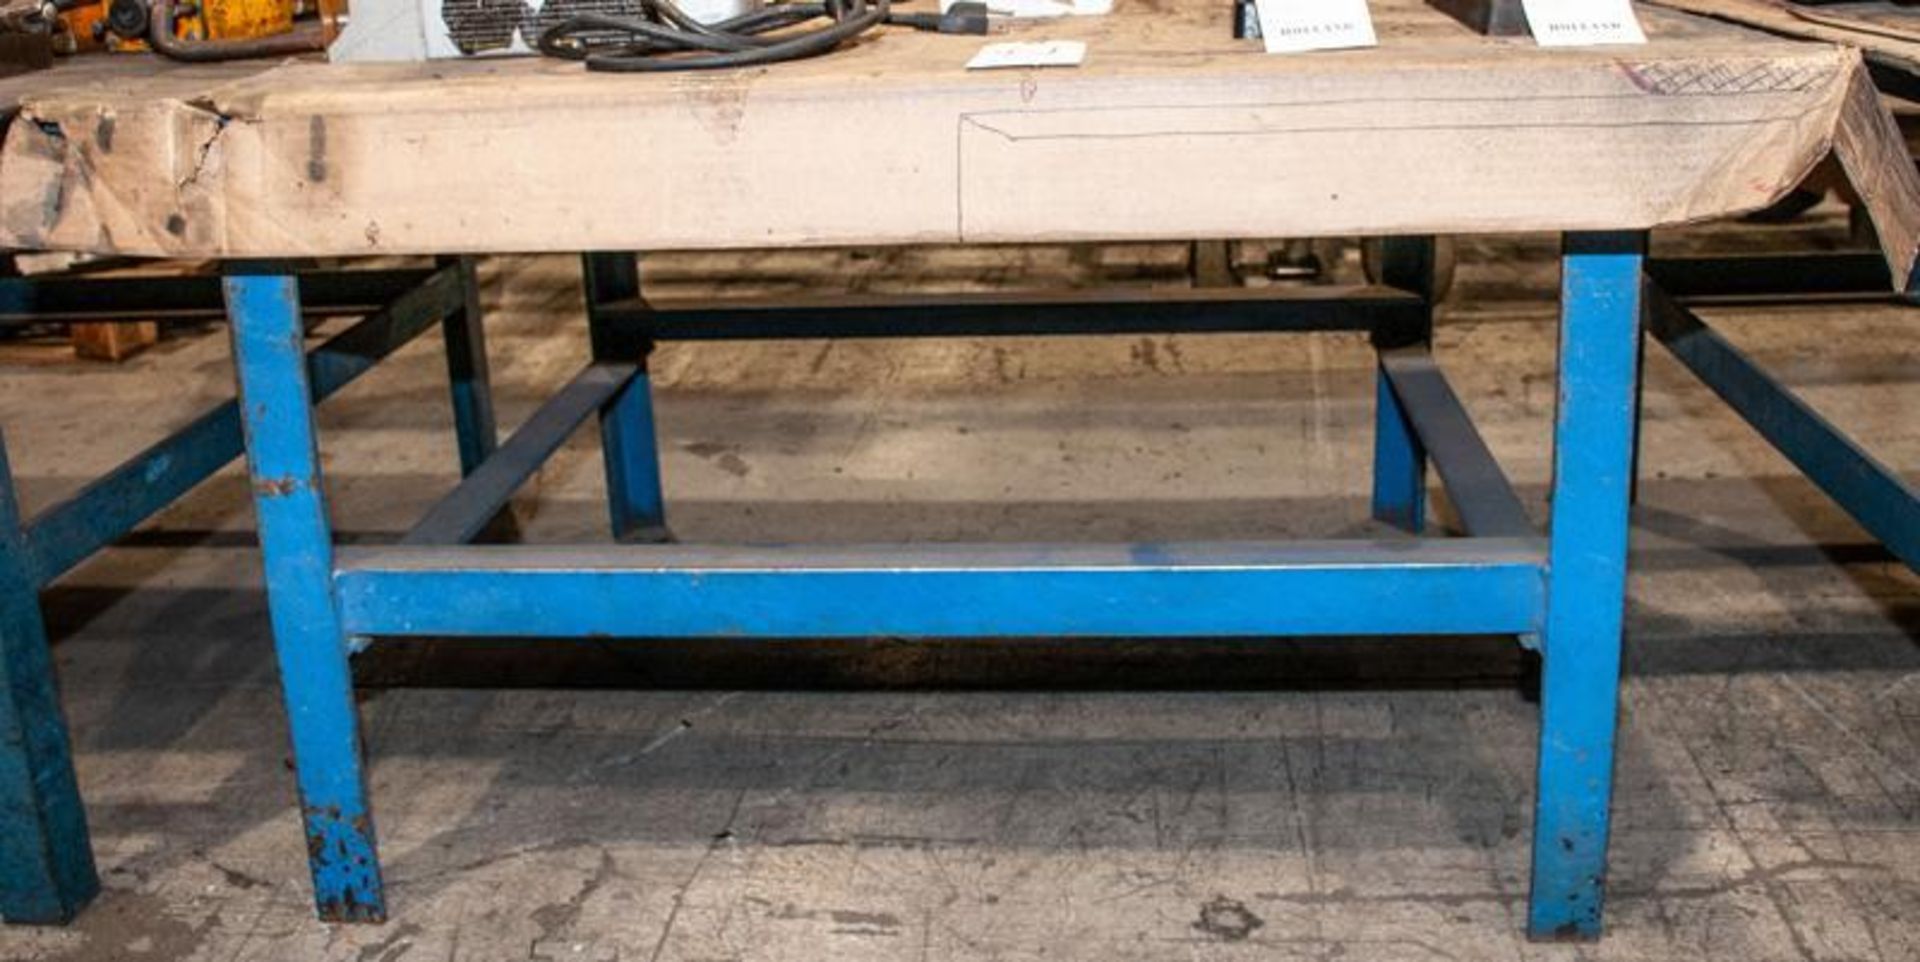 Steel table approx. 36" x 44" x 24"T, (NO Contents steel table only)